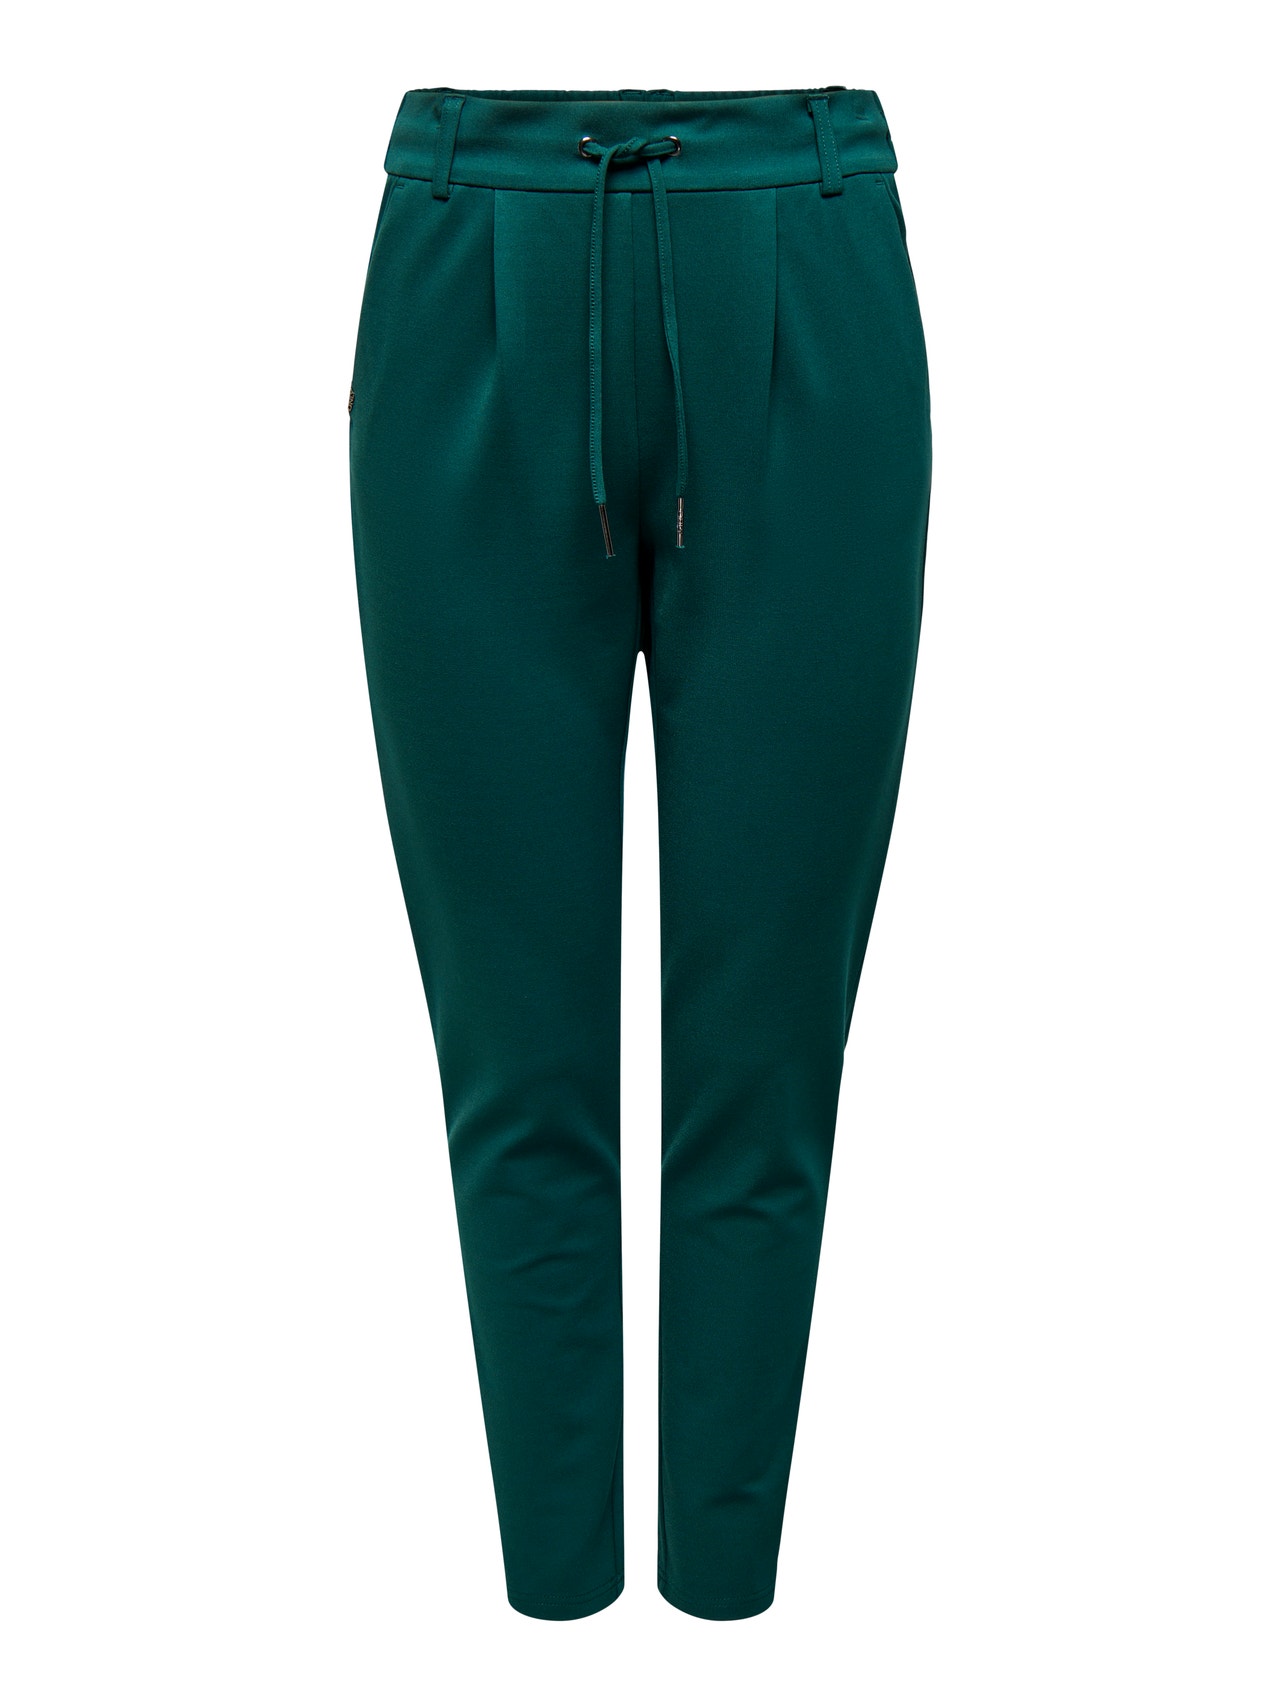 ONLY Regular Fit Trousers -Green Gables - 15115847